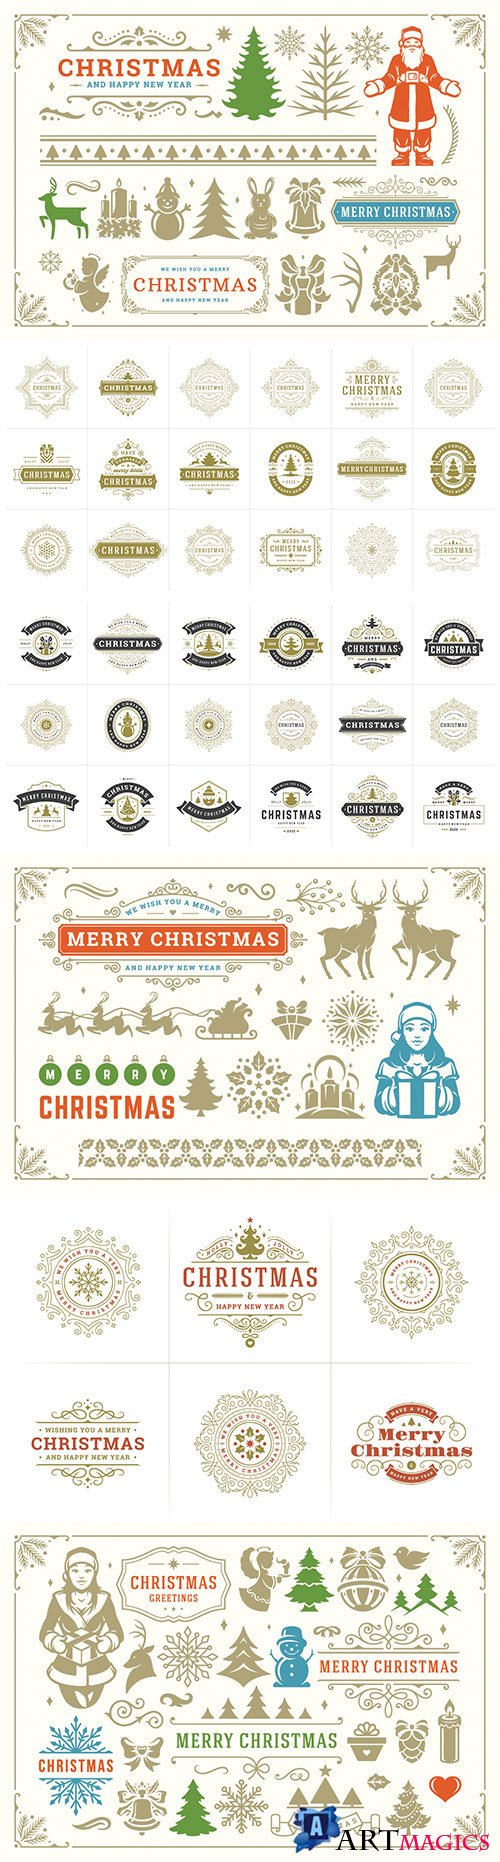 Christmas vector decoration symbols, ornate vignettes and icons